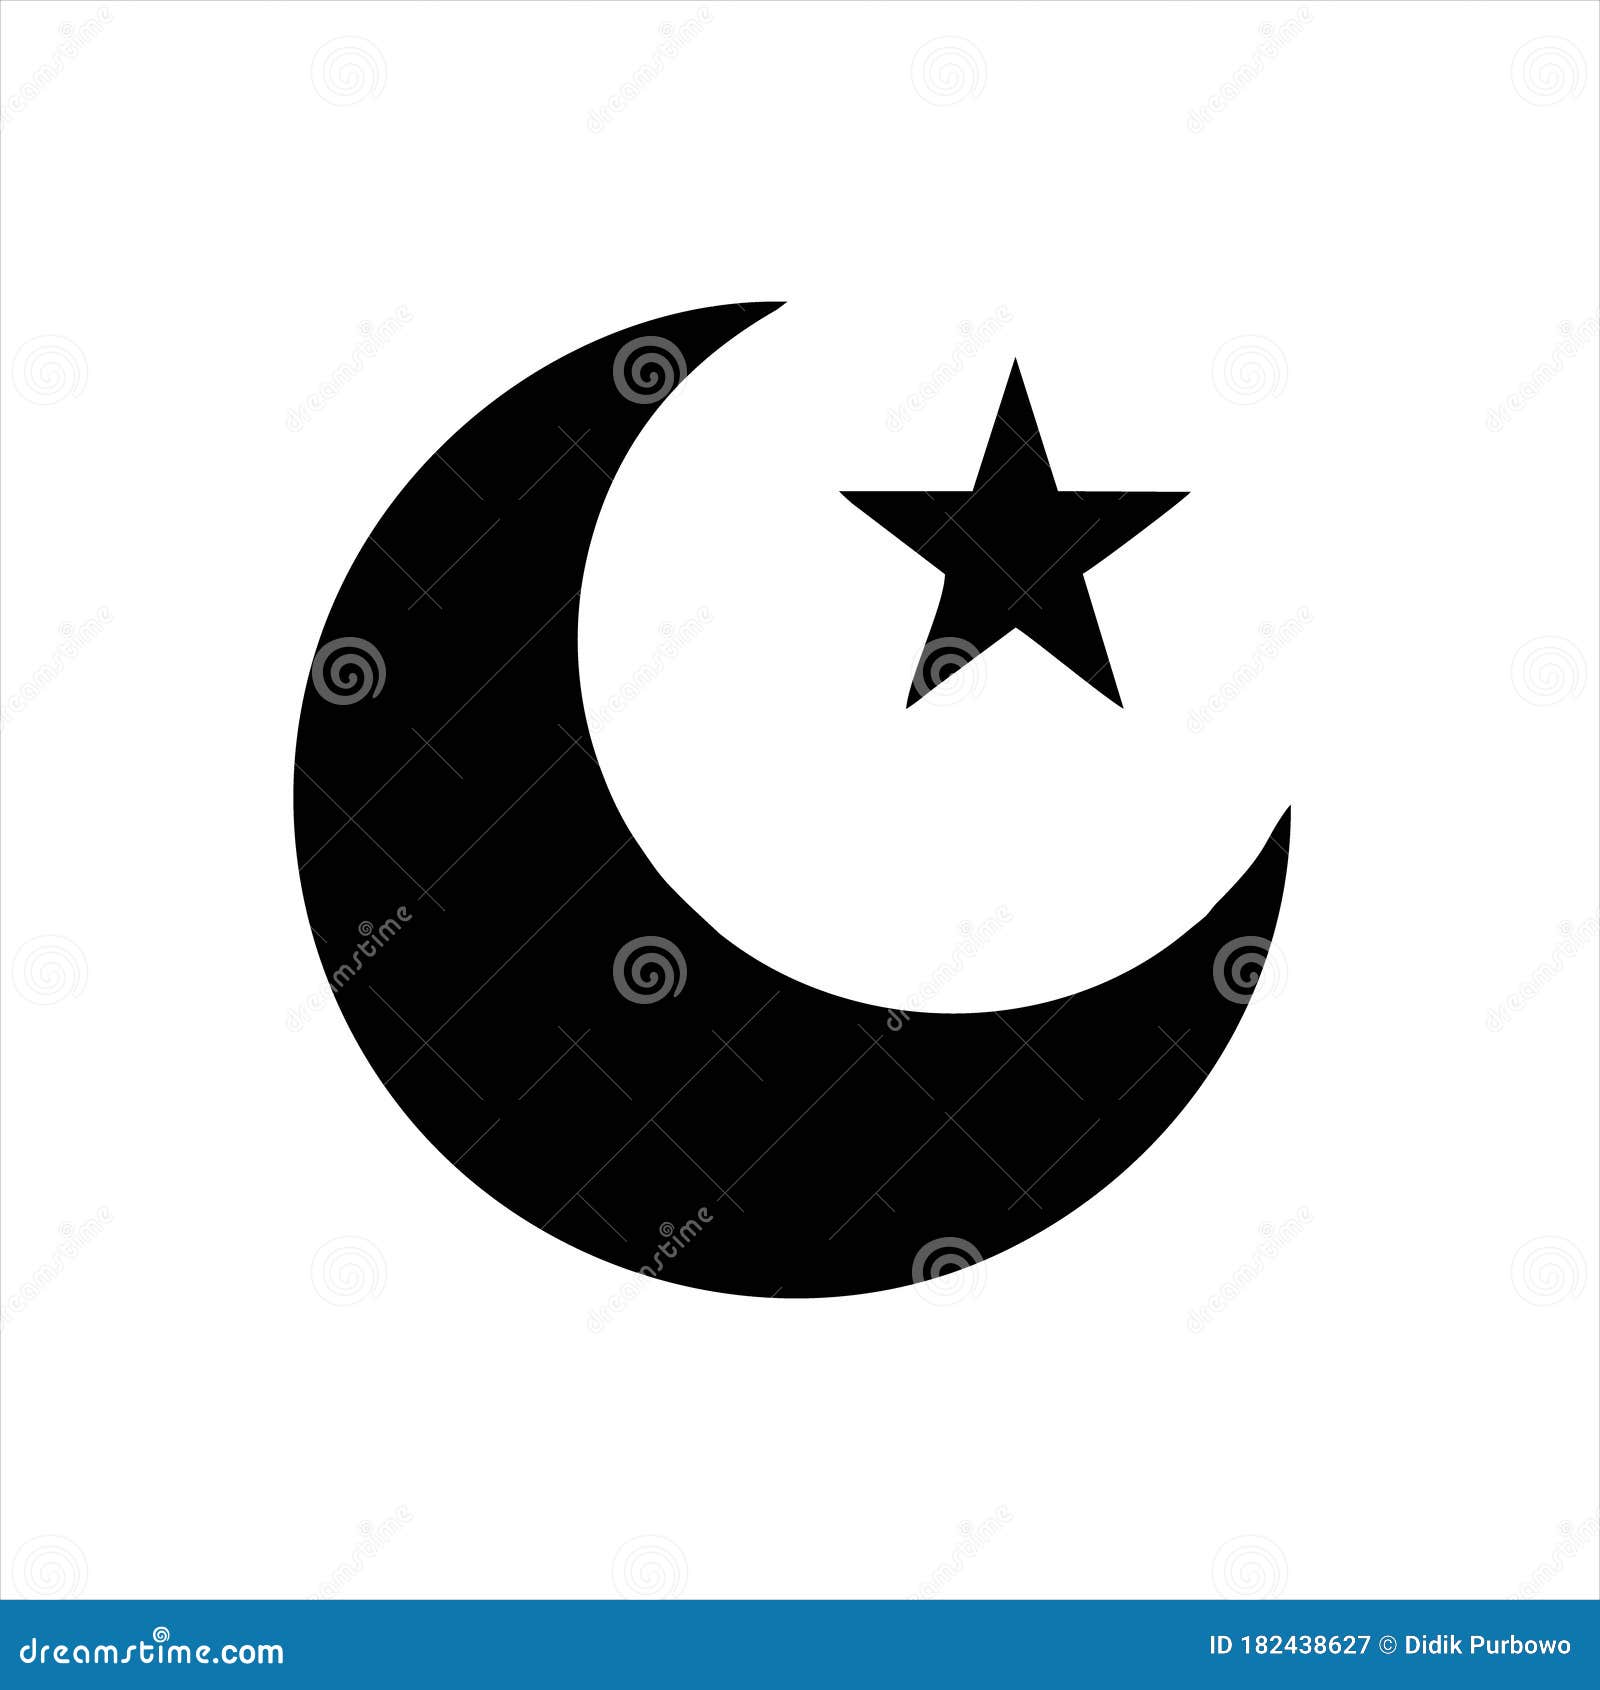 Star And Crescent Moon Icon Isolated On White Background Star And Crescent Moon Icon Simple Sign Stock Vector Illustration Of Popular Islamic